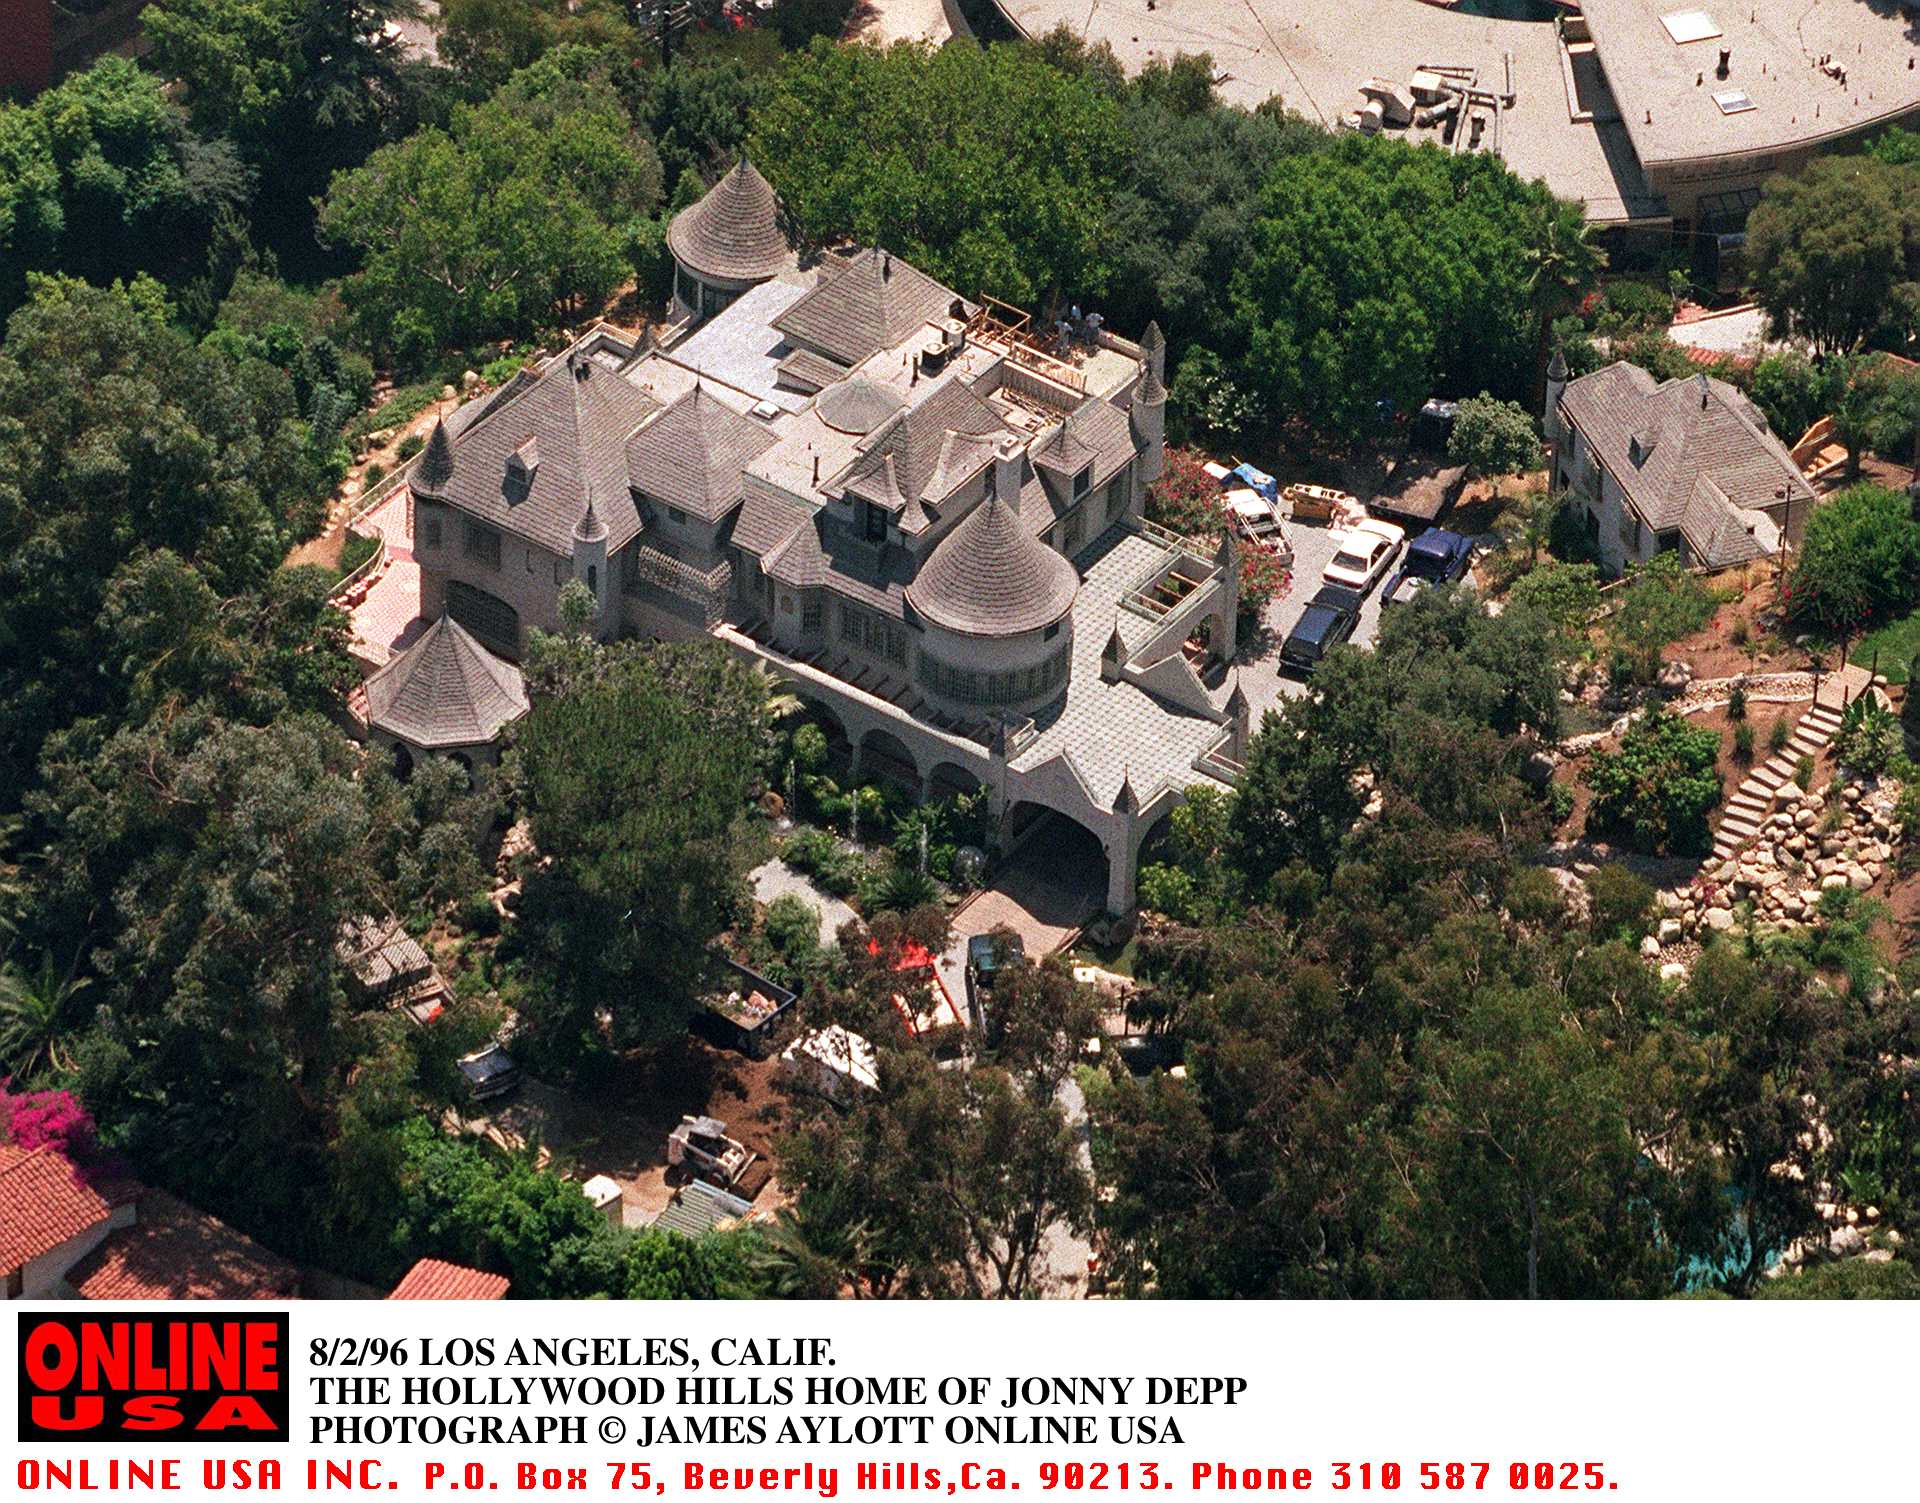 Picture of actor, Jonny Depp's Hollywood home in Los Angeles, California | Source: Getty Images